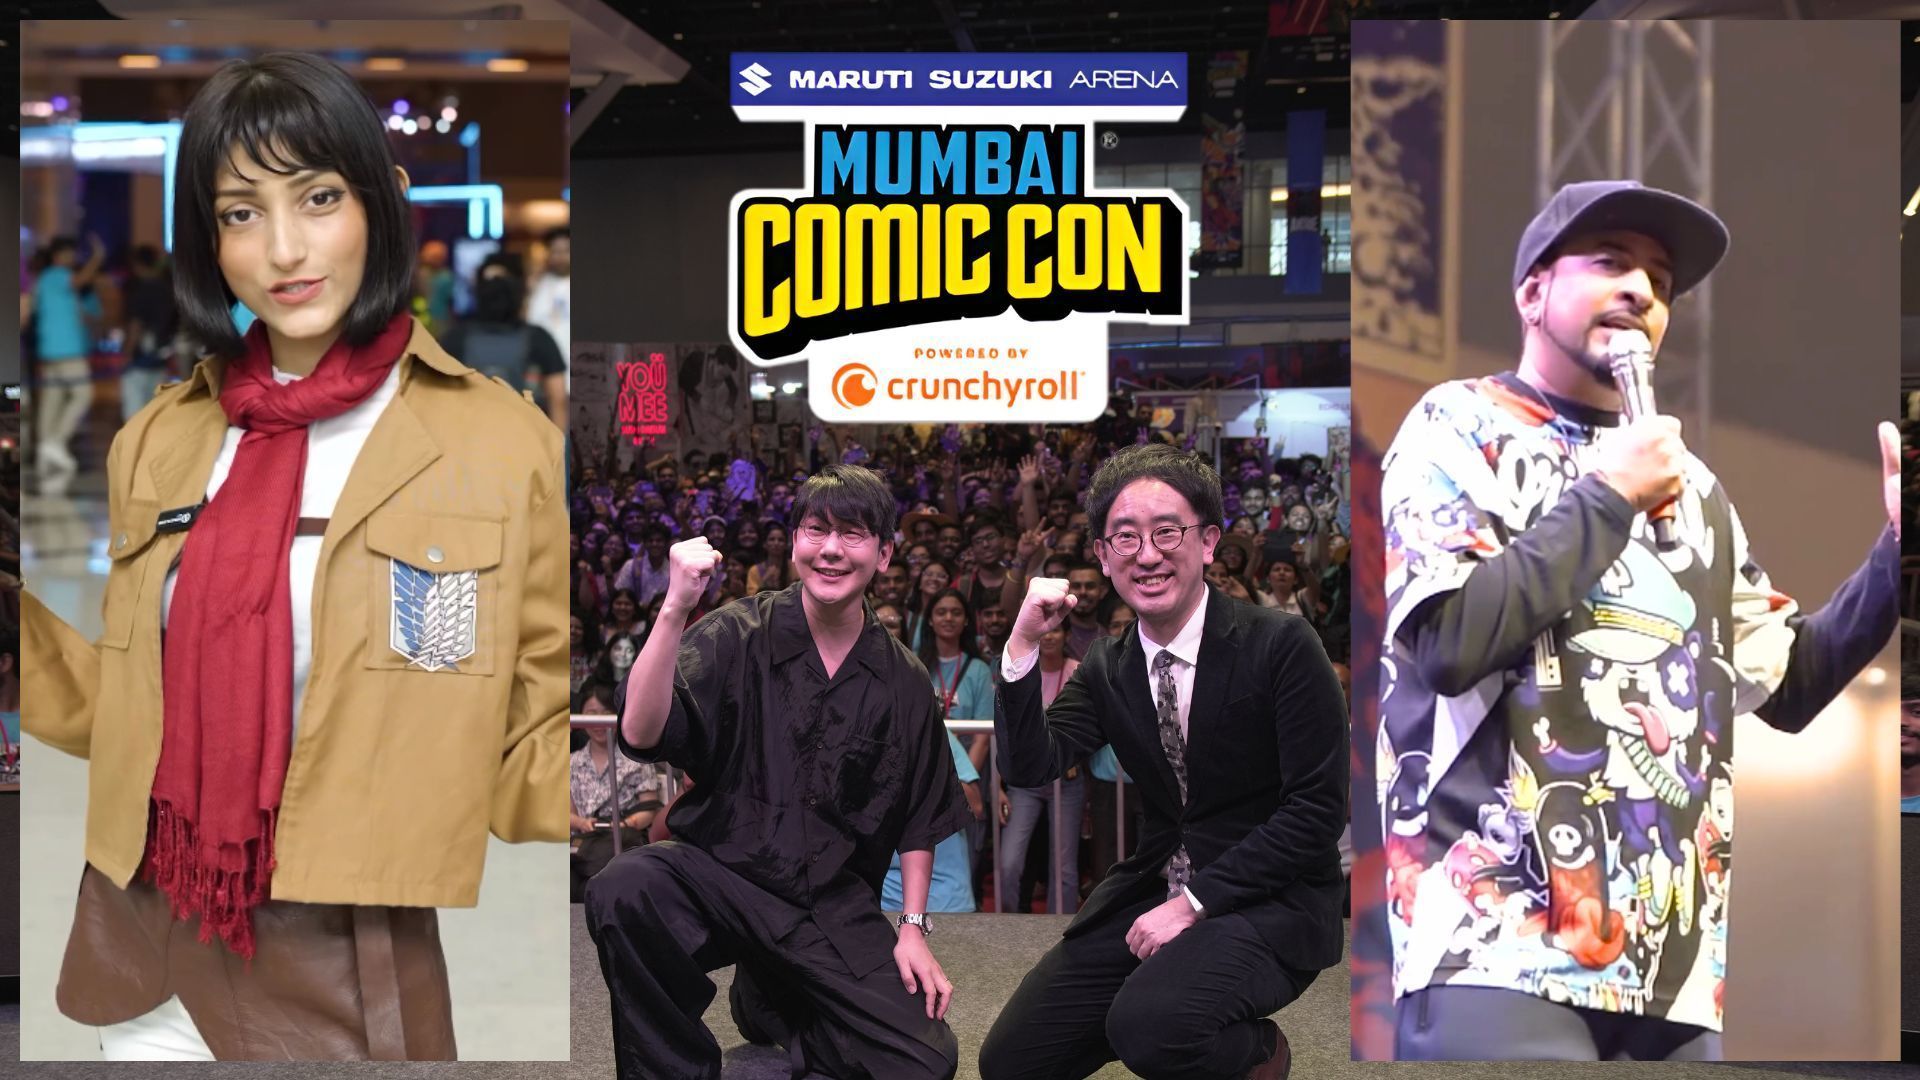 Mumbai Comic Con brings the final part of Anime and Cosplay craze to India